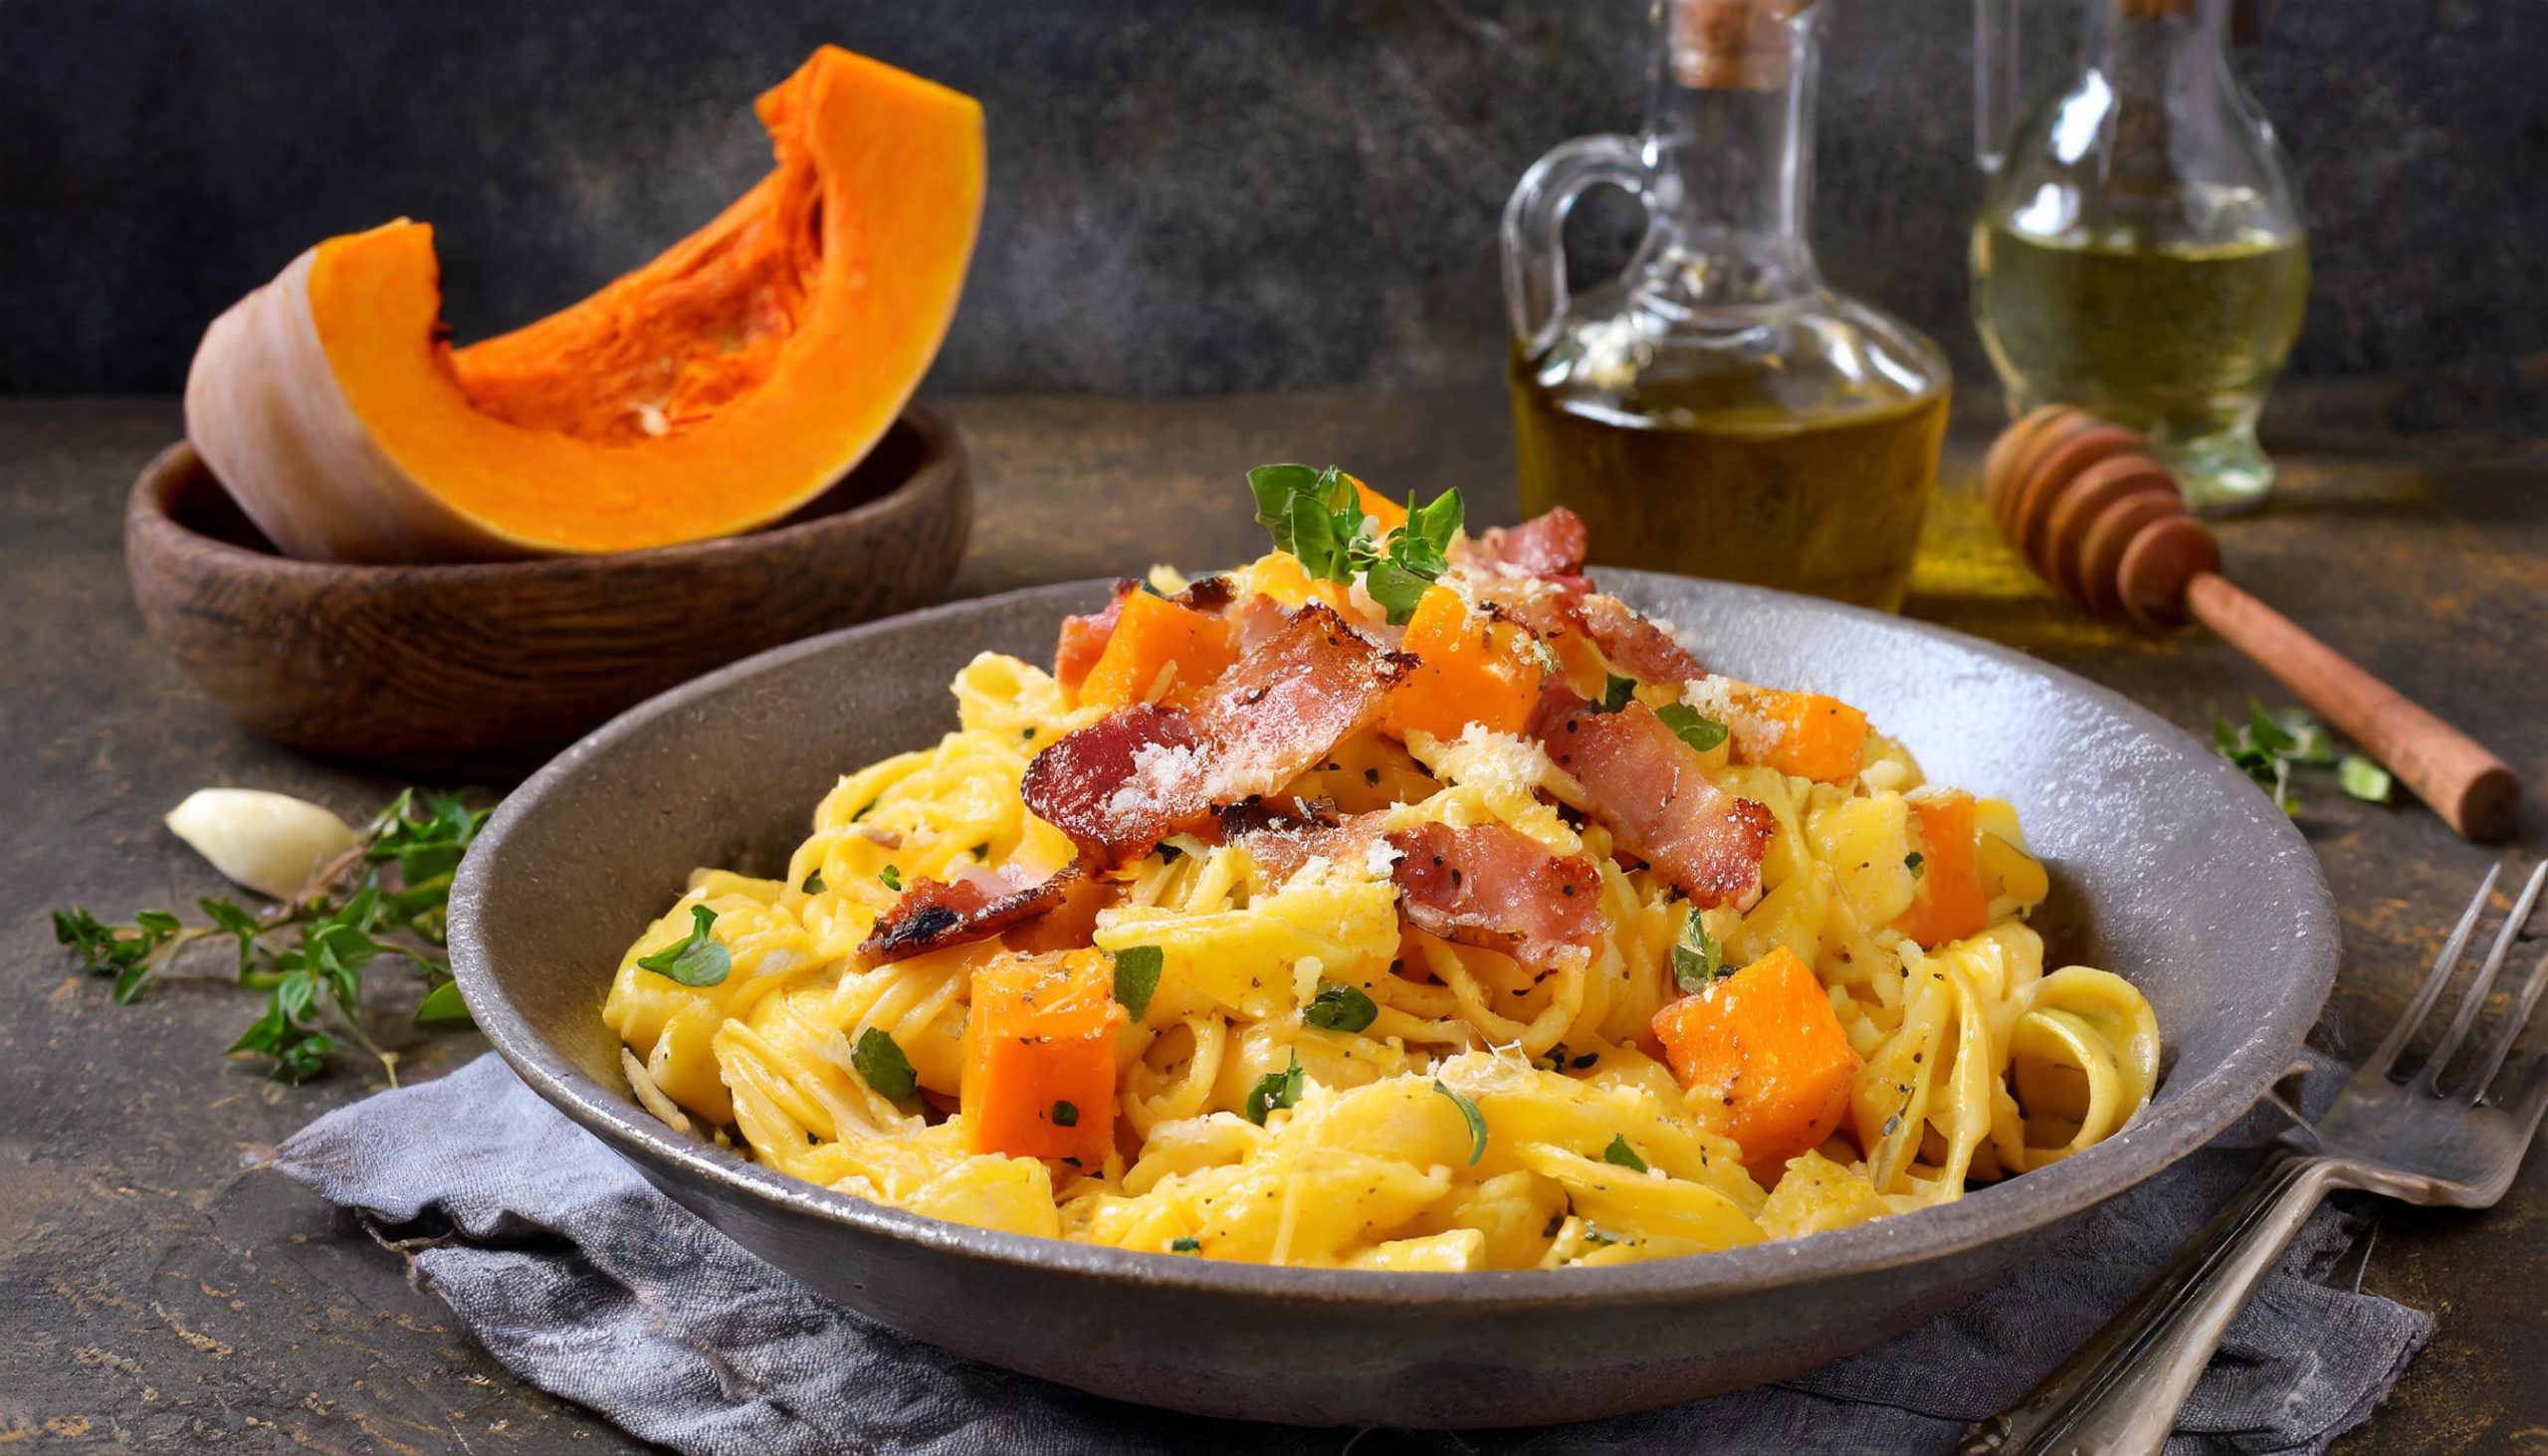 Pasta with butternut squash, bacon, and brown butter